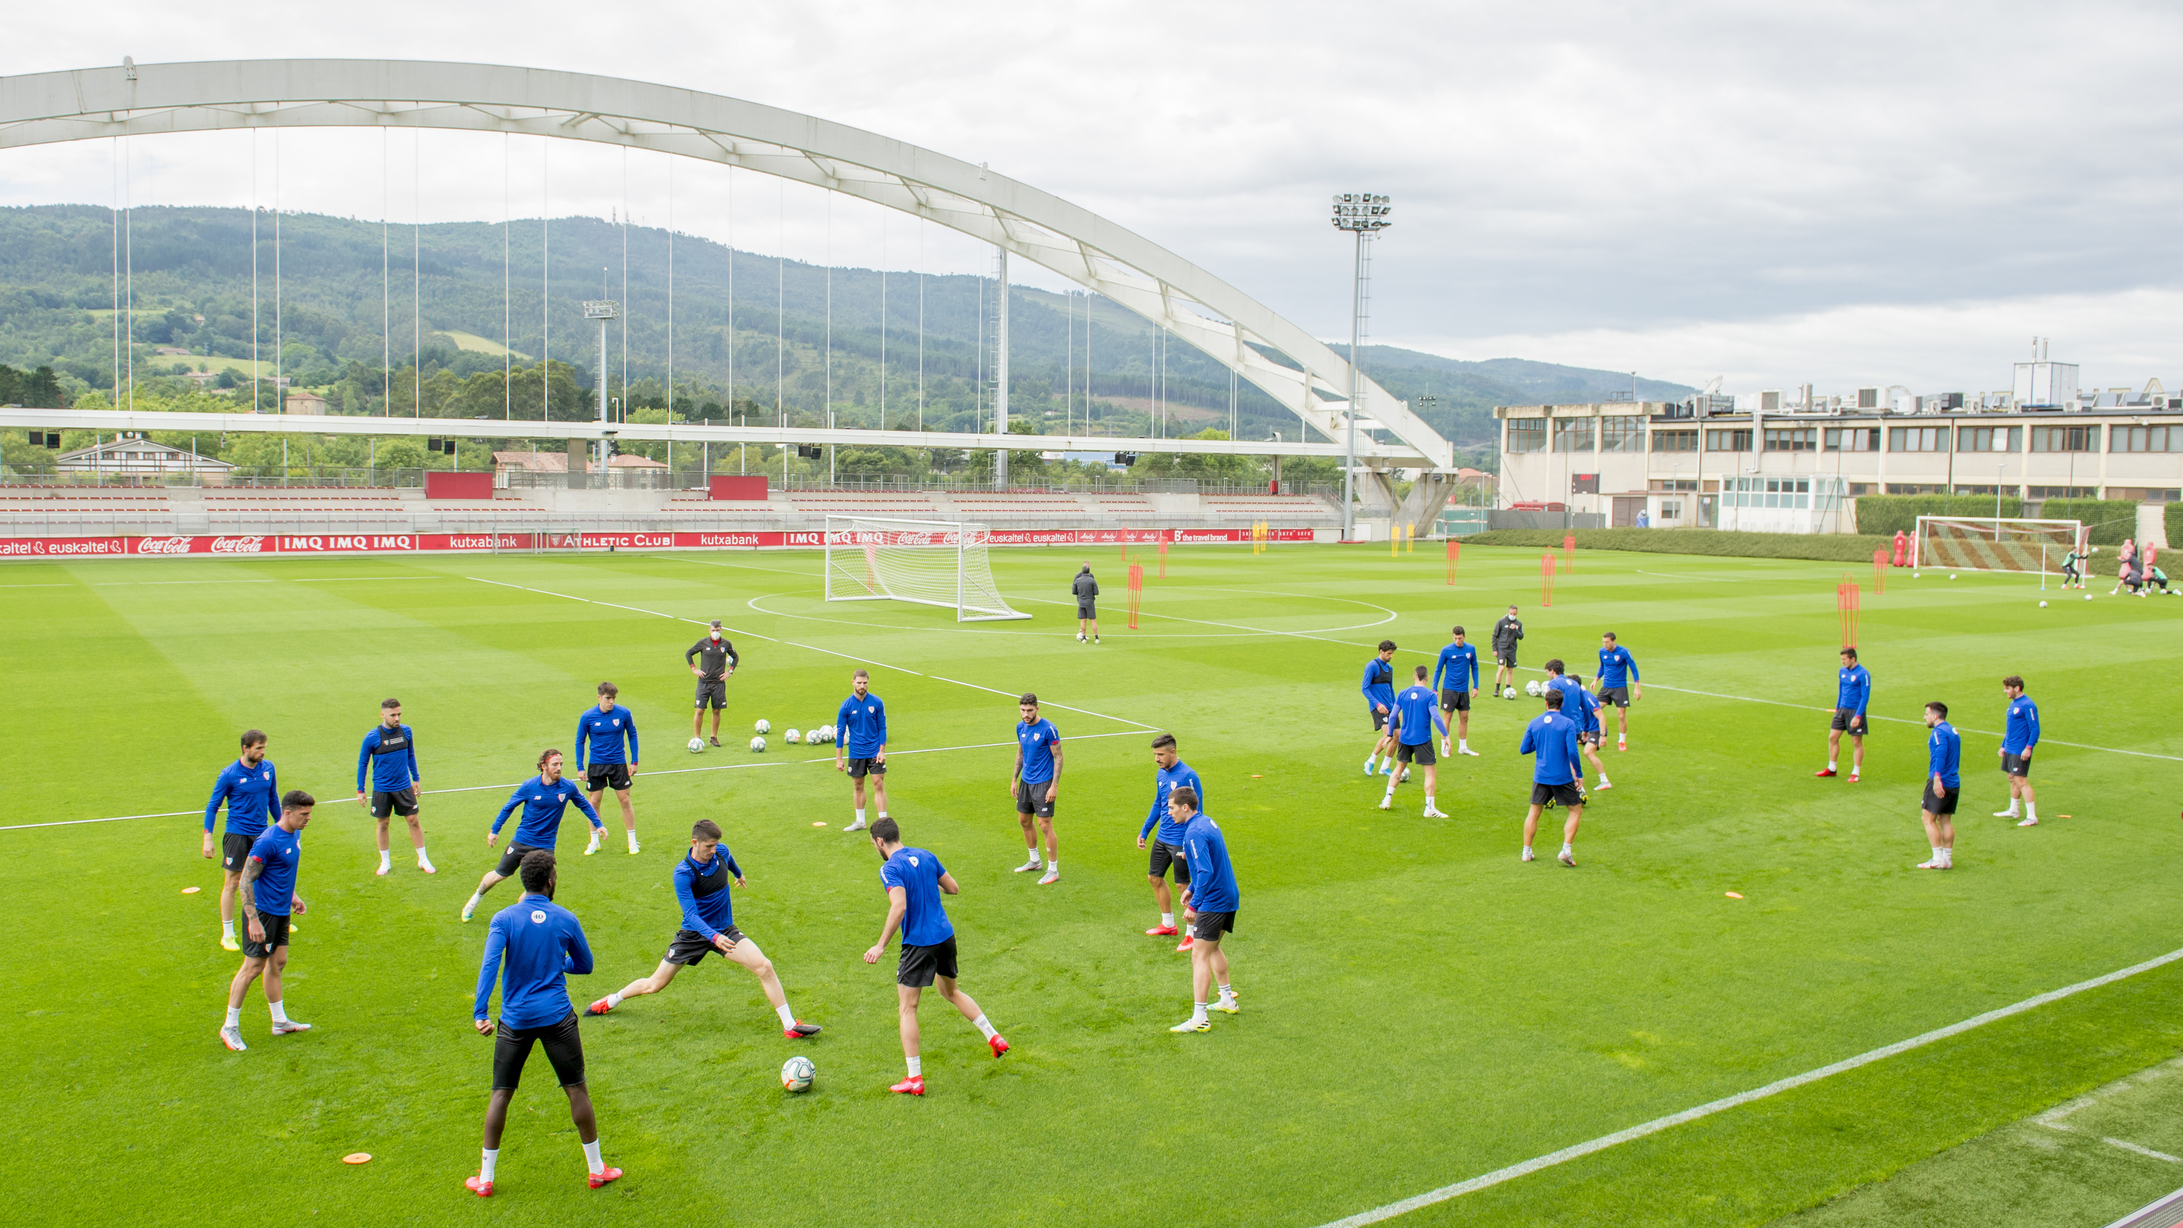 Last training session ahead of the Athletic v Atleti league game